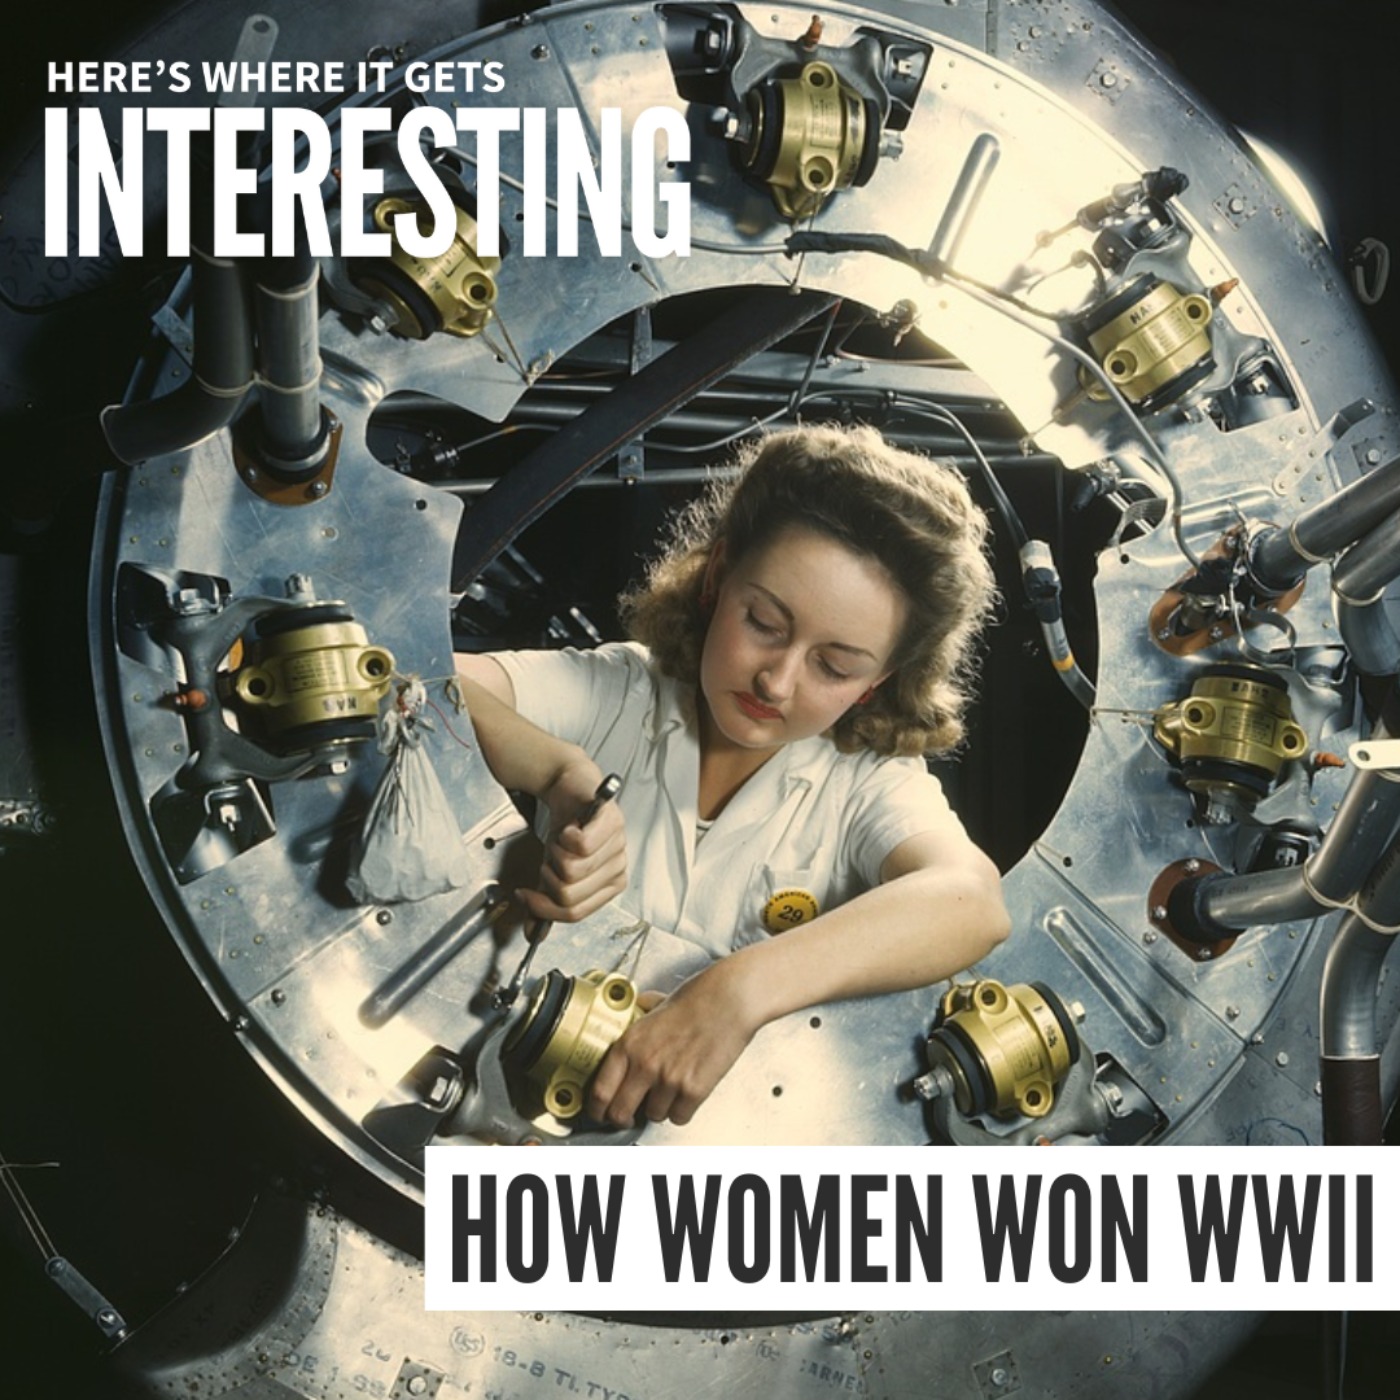 How Women Won WWII: The Booming Work of Women Scientists